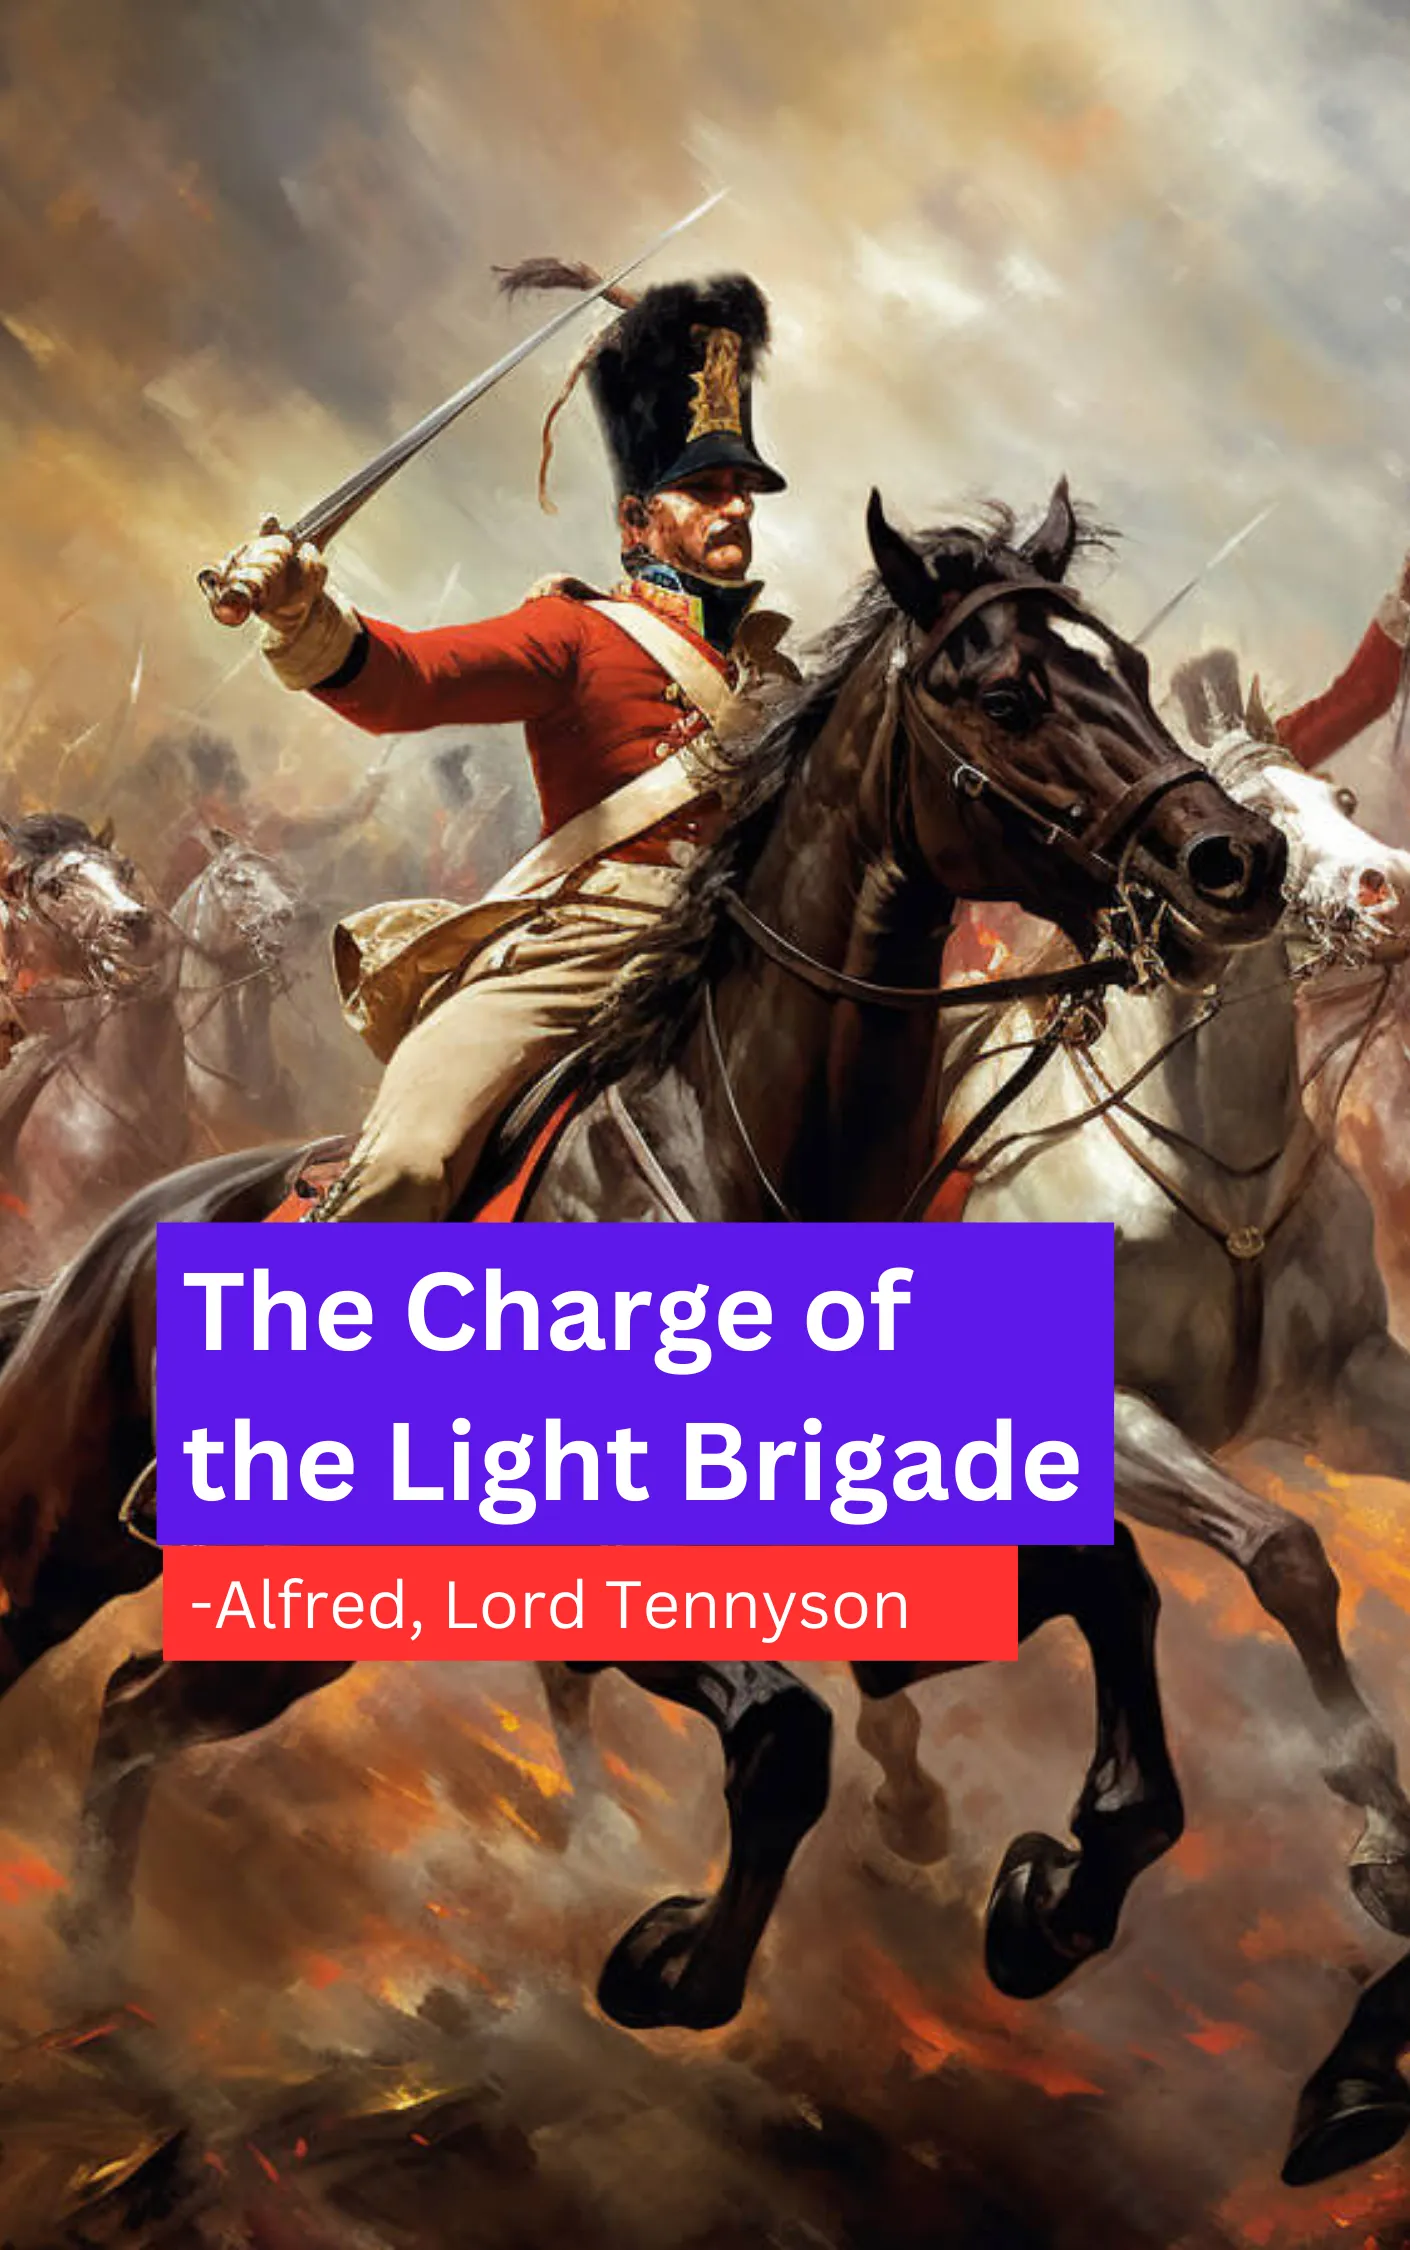 The Charge of the Light Brigade Summary & Analysis